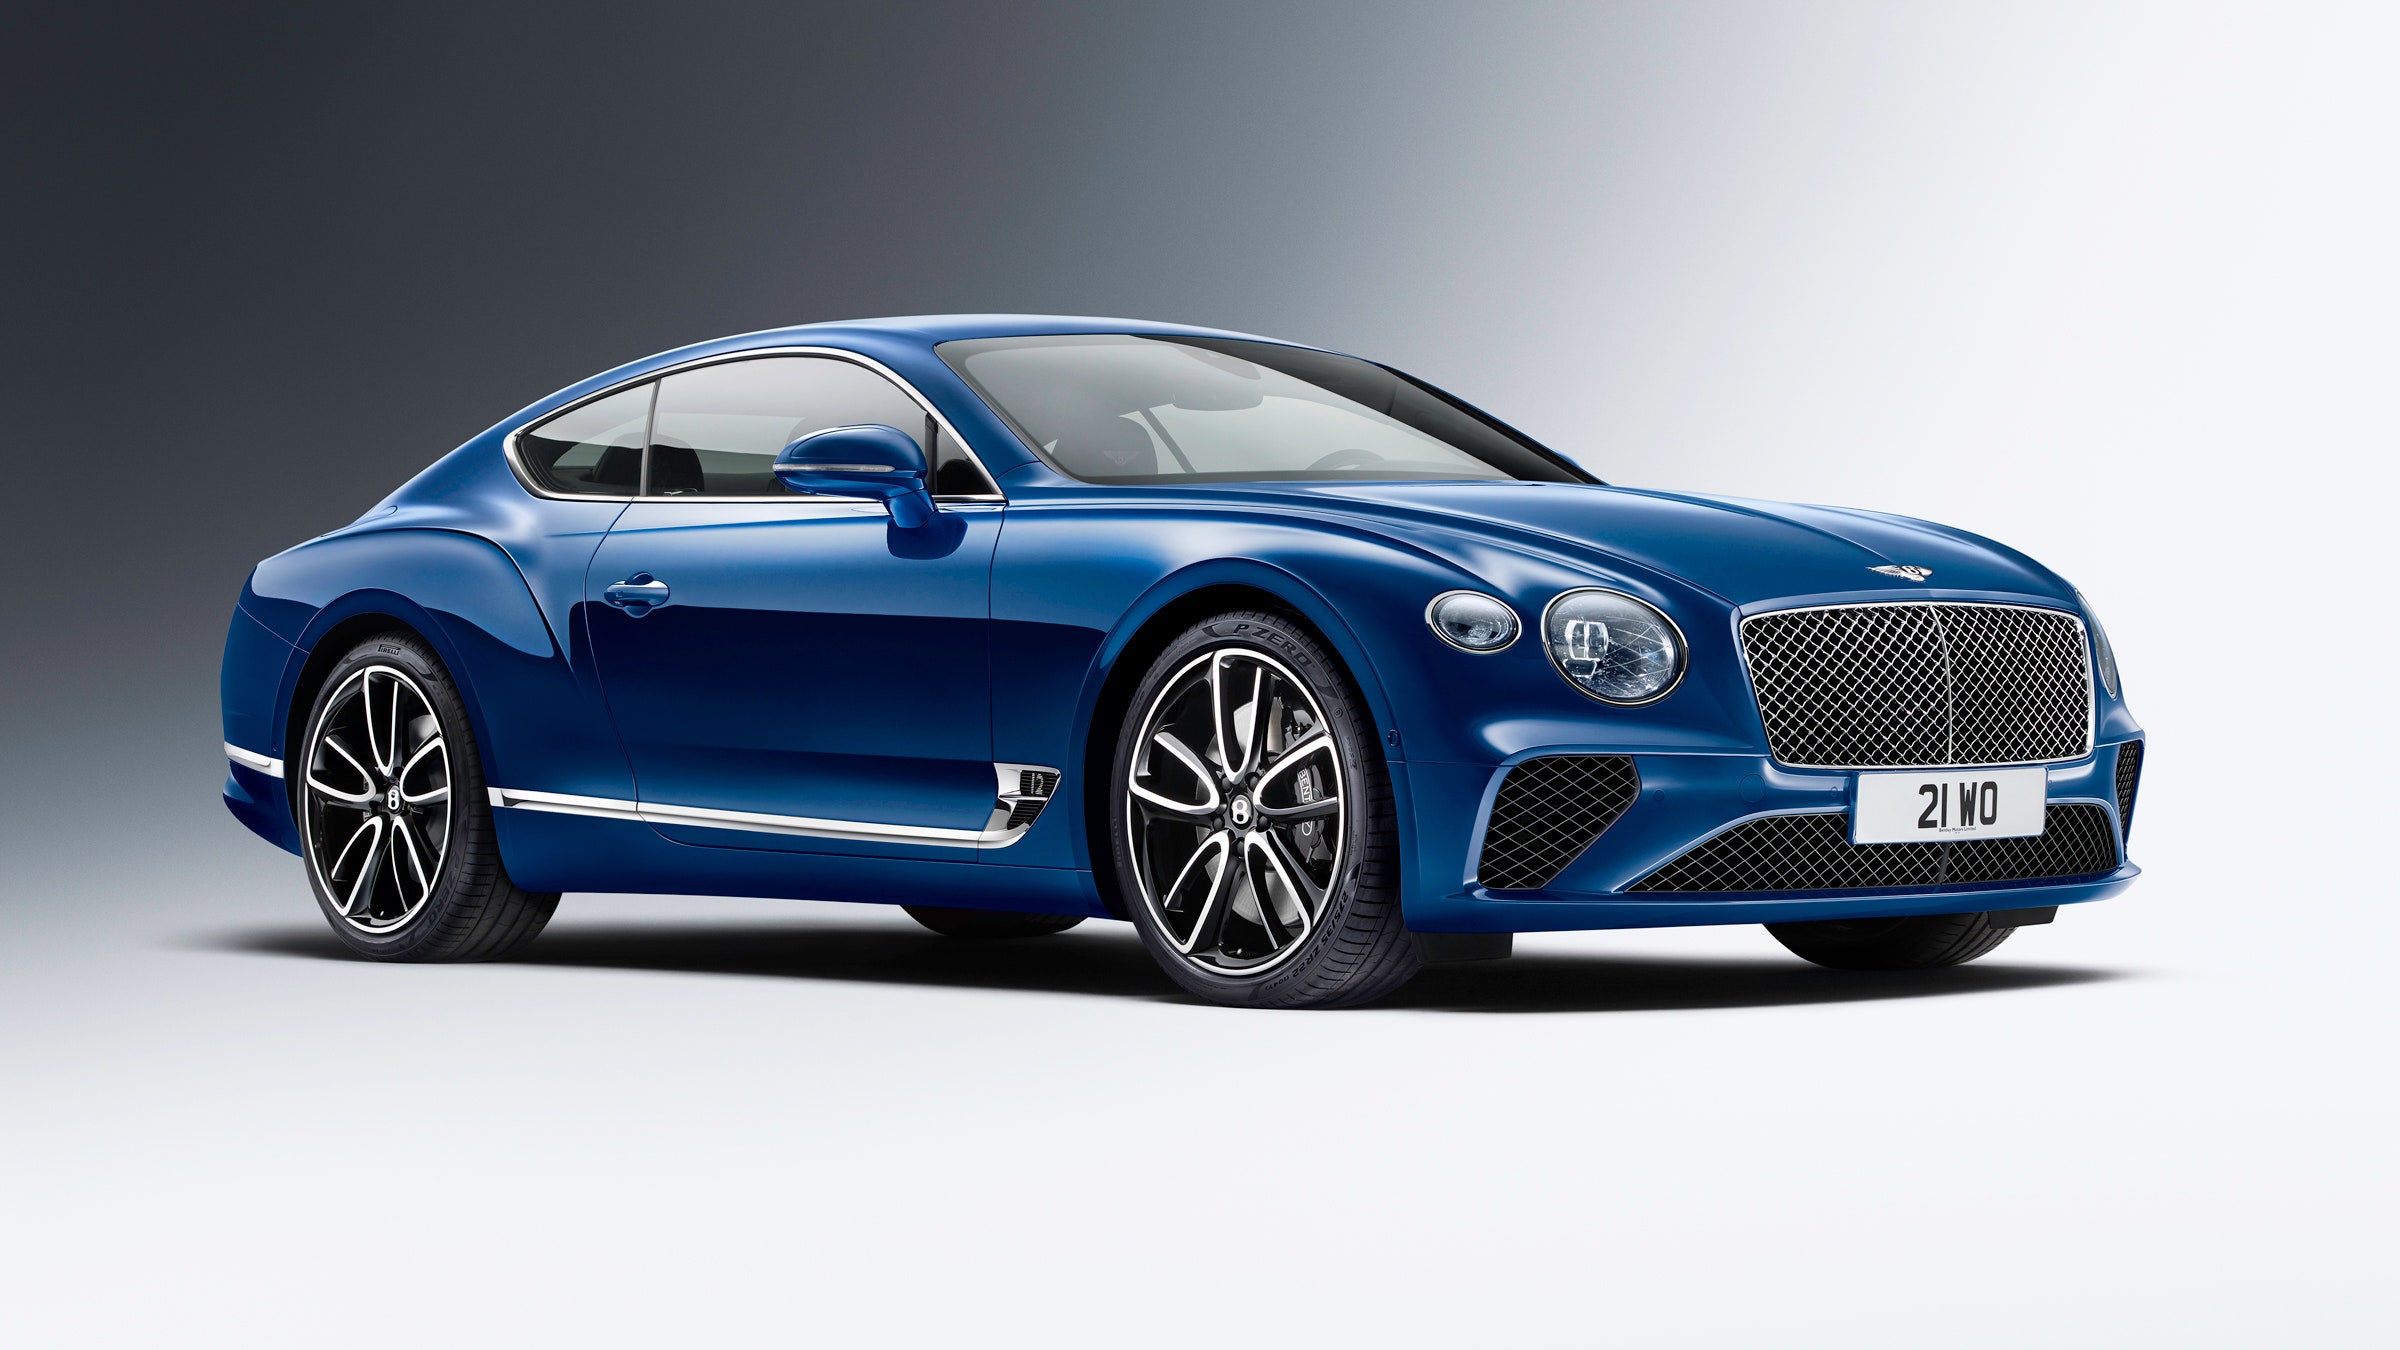 Bentley's New Continental GT Combines Luxury Tech With Classic Looks | WIRED